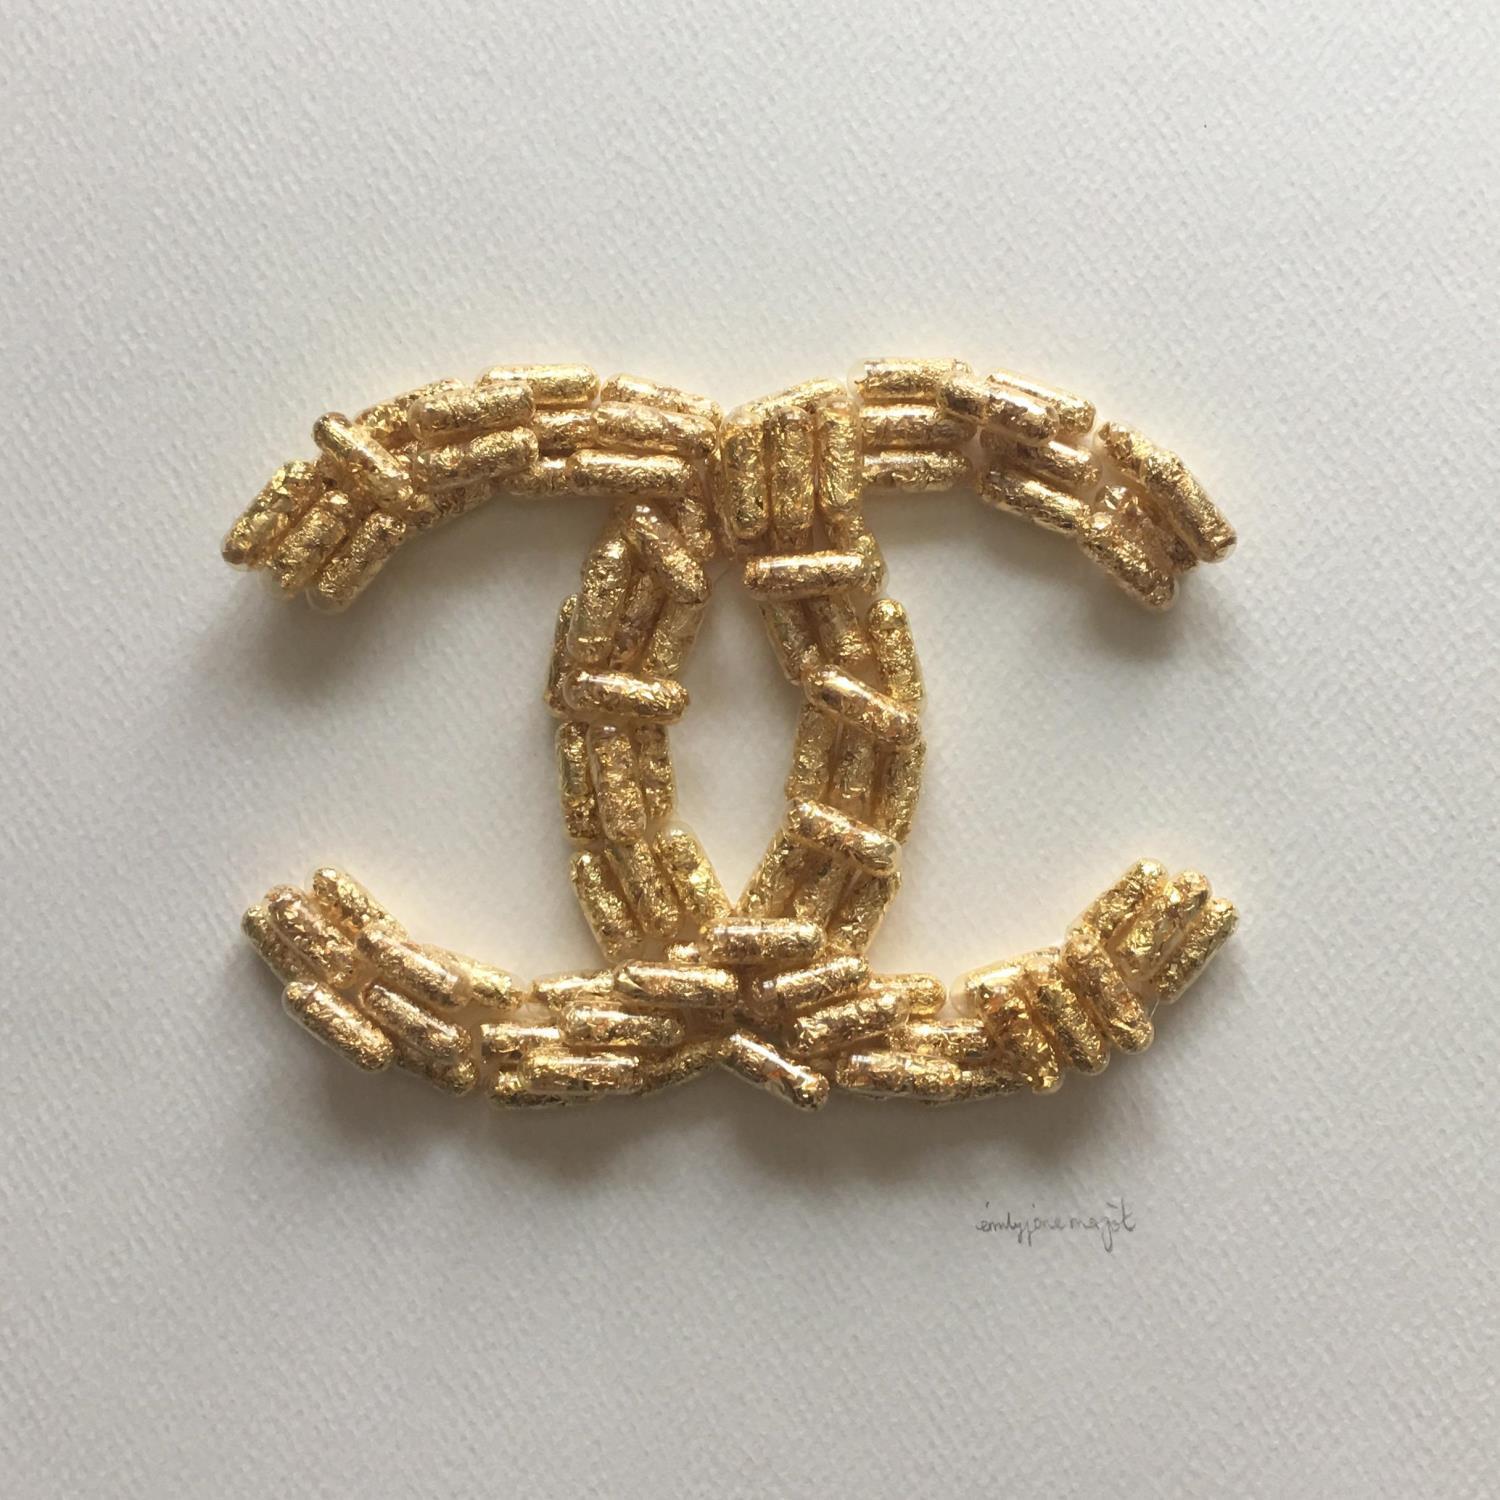 Cheap chanel brooch dhgate big sale  OFF 66